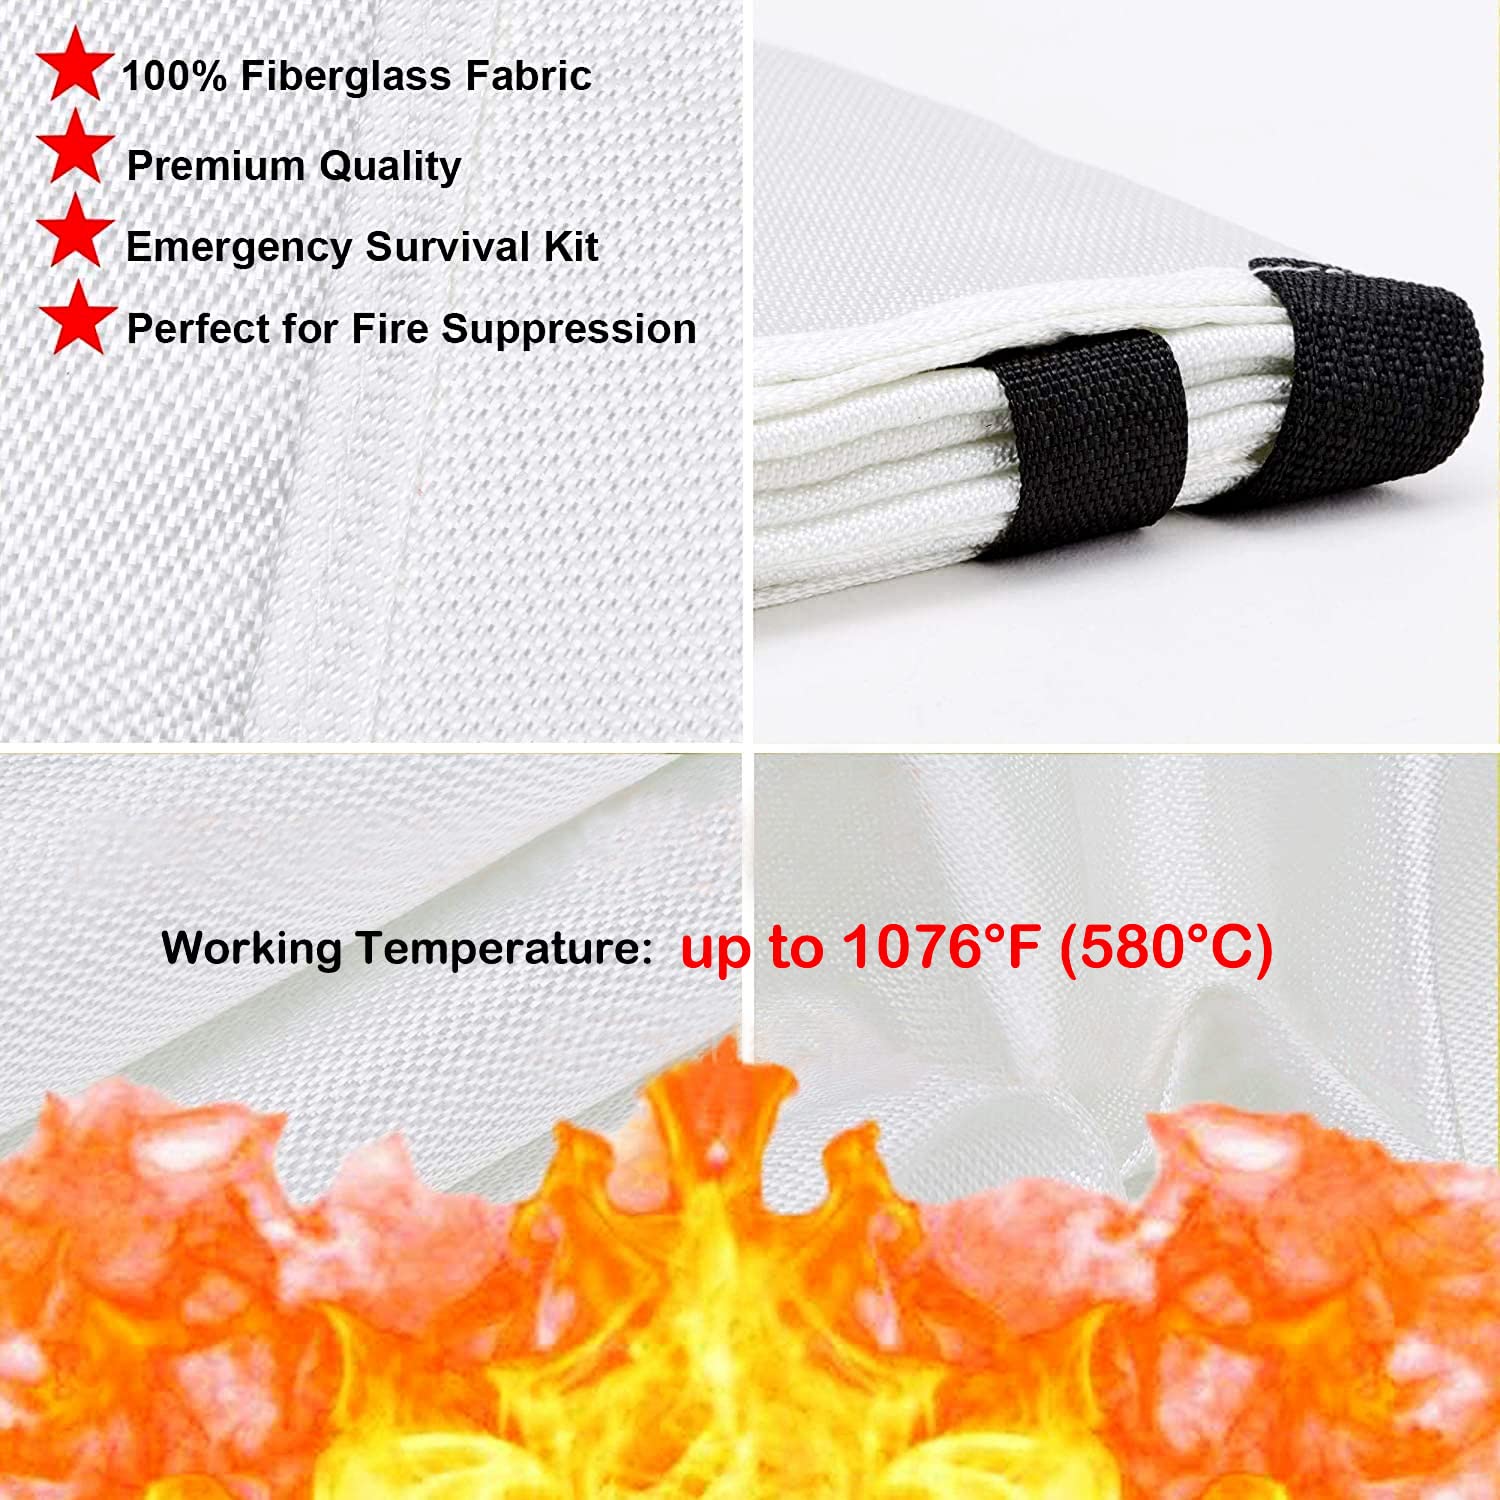 Tonyko Fiberglass Fire Blanket for Emergency Surival, Flame Retardant Protection and Heat Insulation with Various Sizes (39.3×39.3 inches)